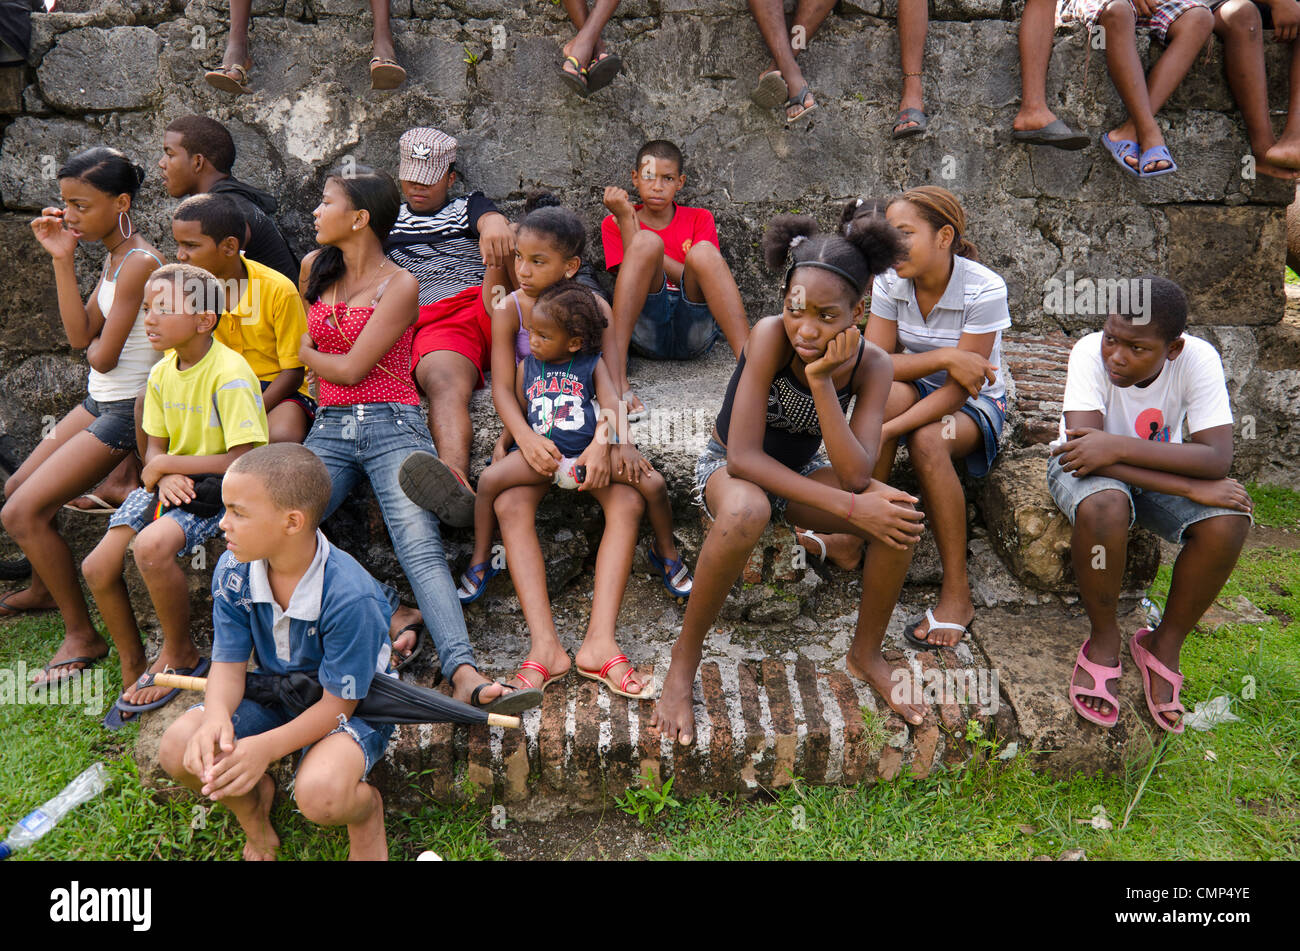 Boys and girls gathered at Devils and Congos Festival Stock Photo